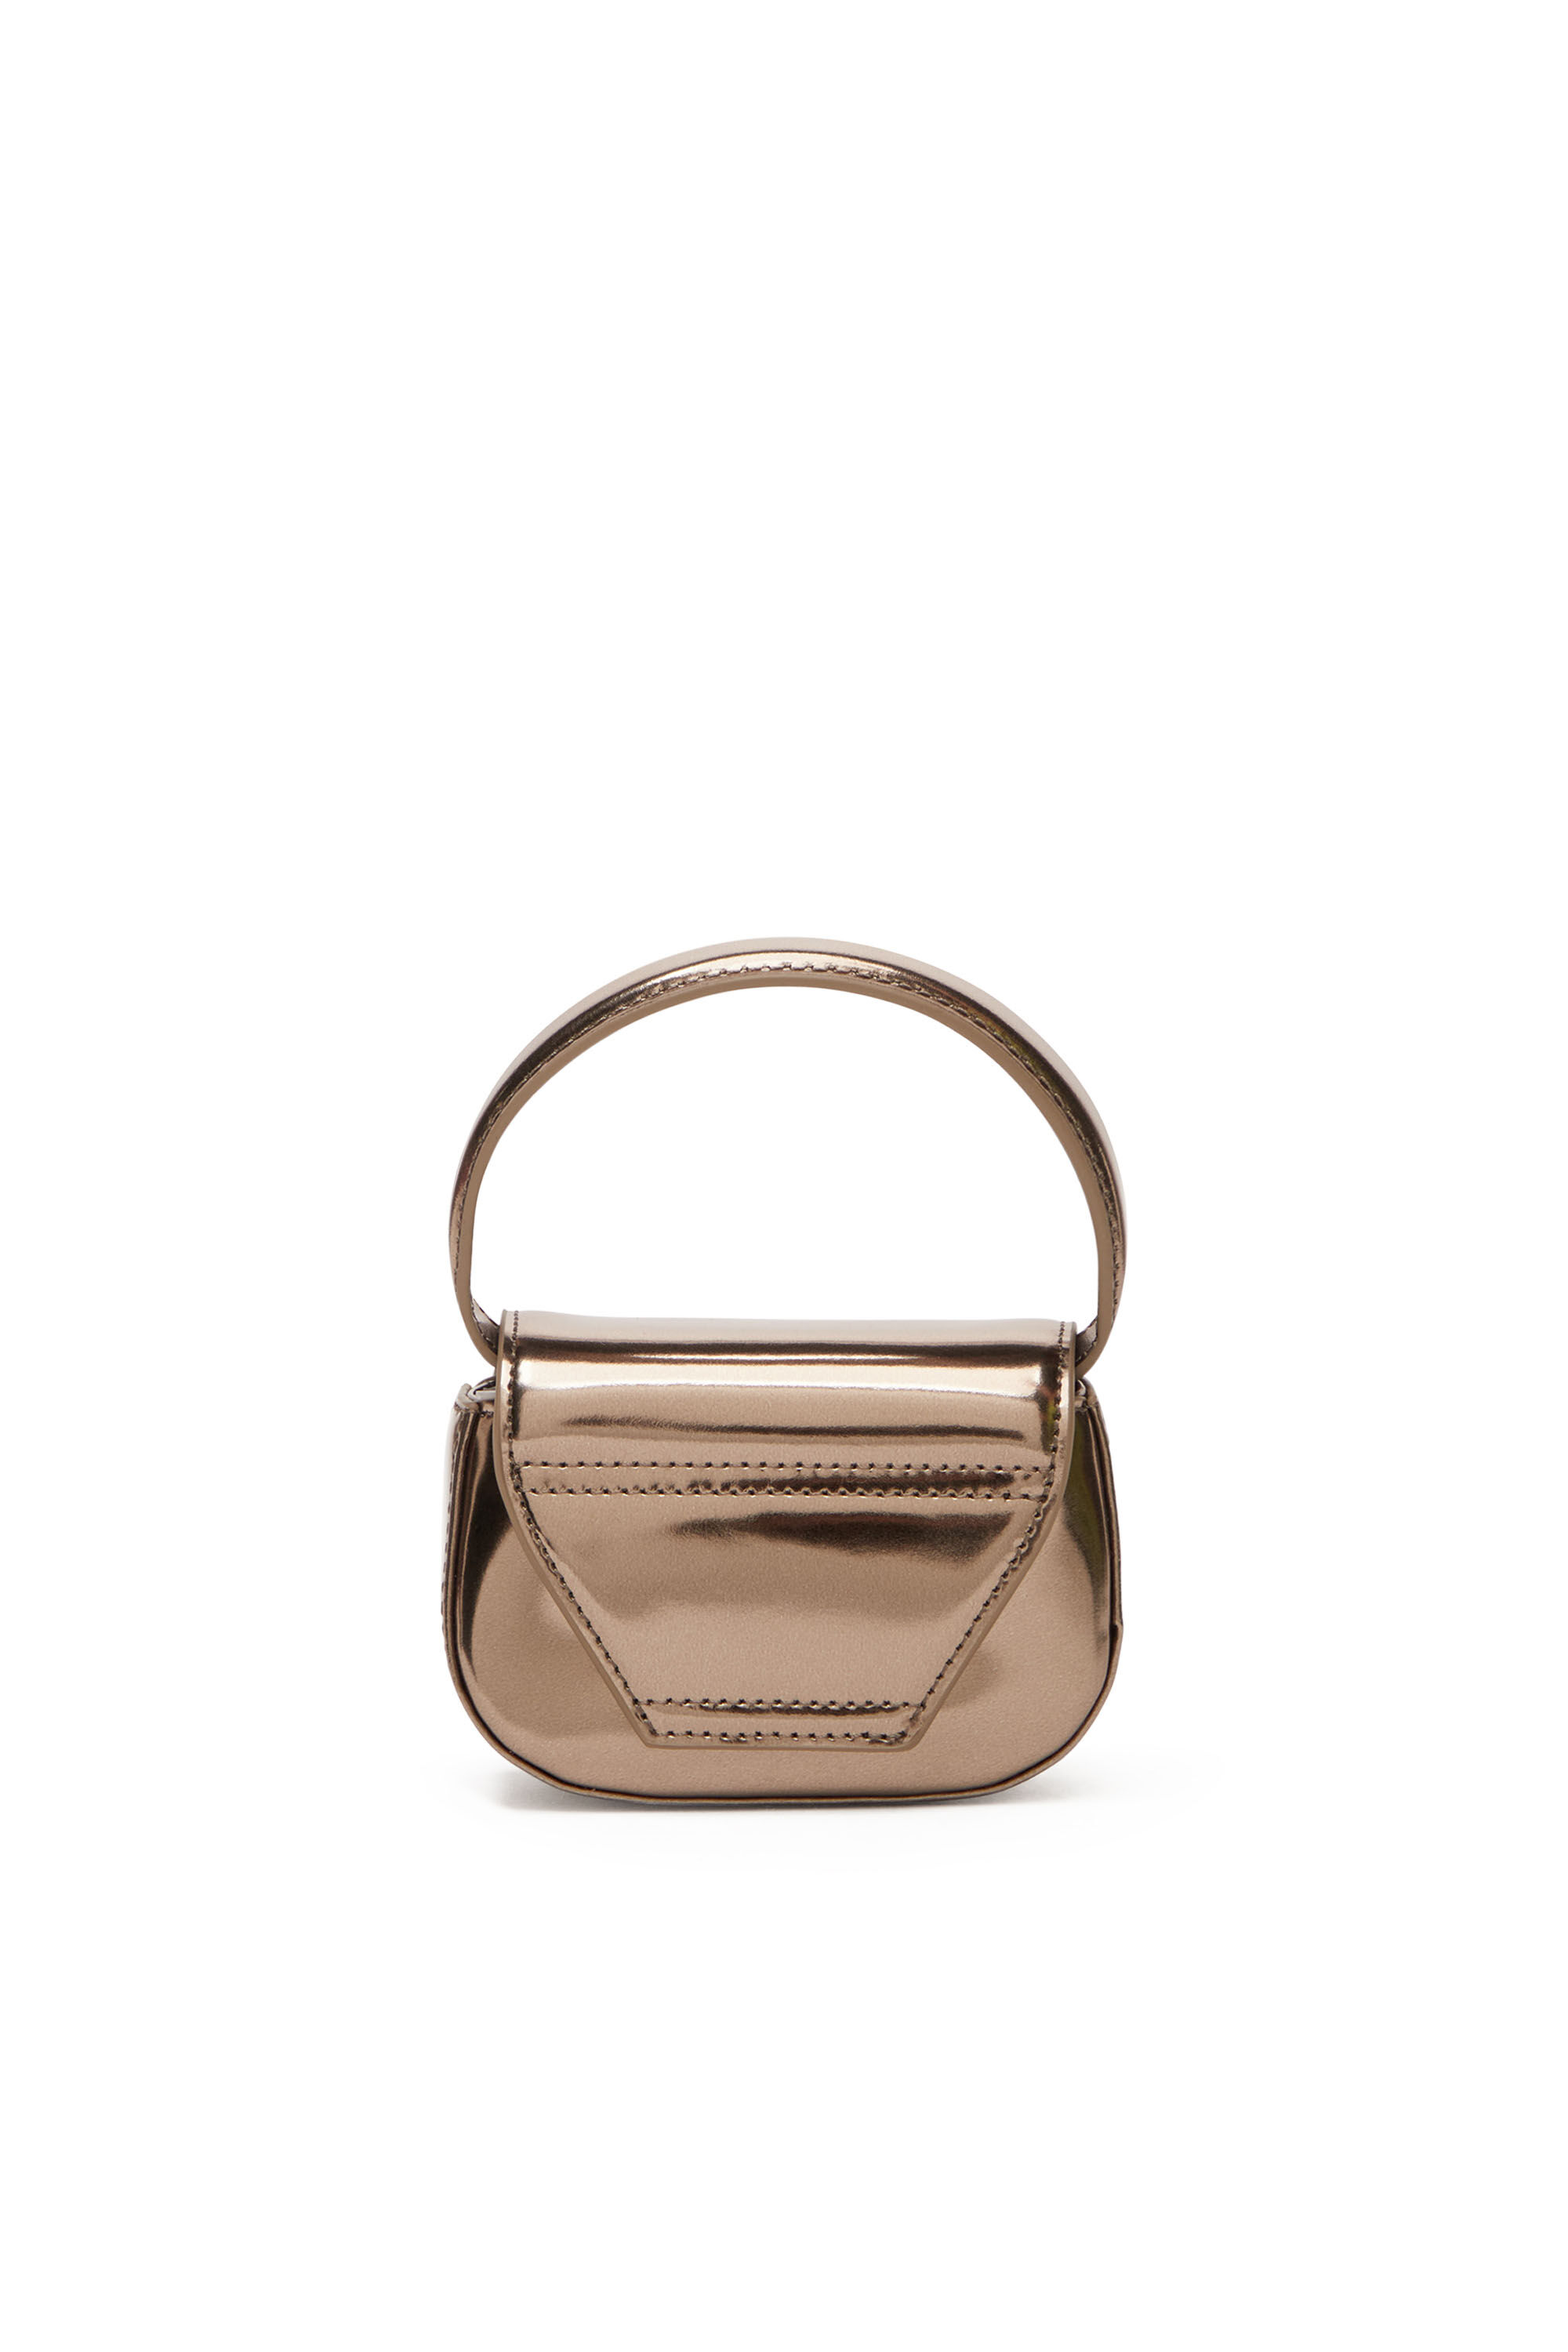 Diesel - 1DR-XS-S, Woman 1DR-XS-S-Iconic mini bag in mirrored leather in Brown - Image 3